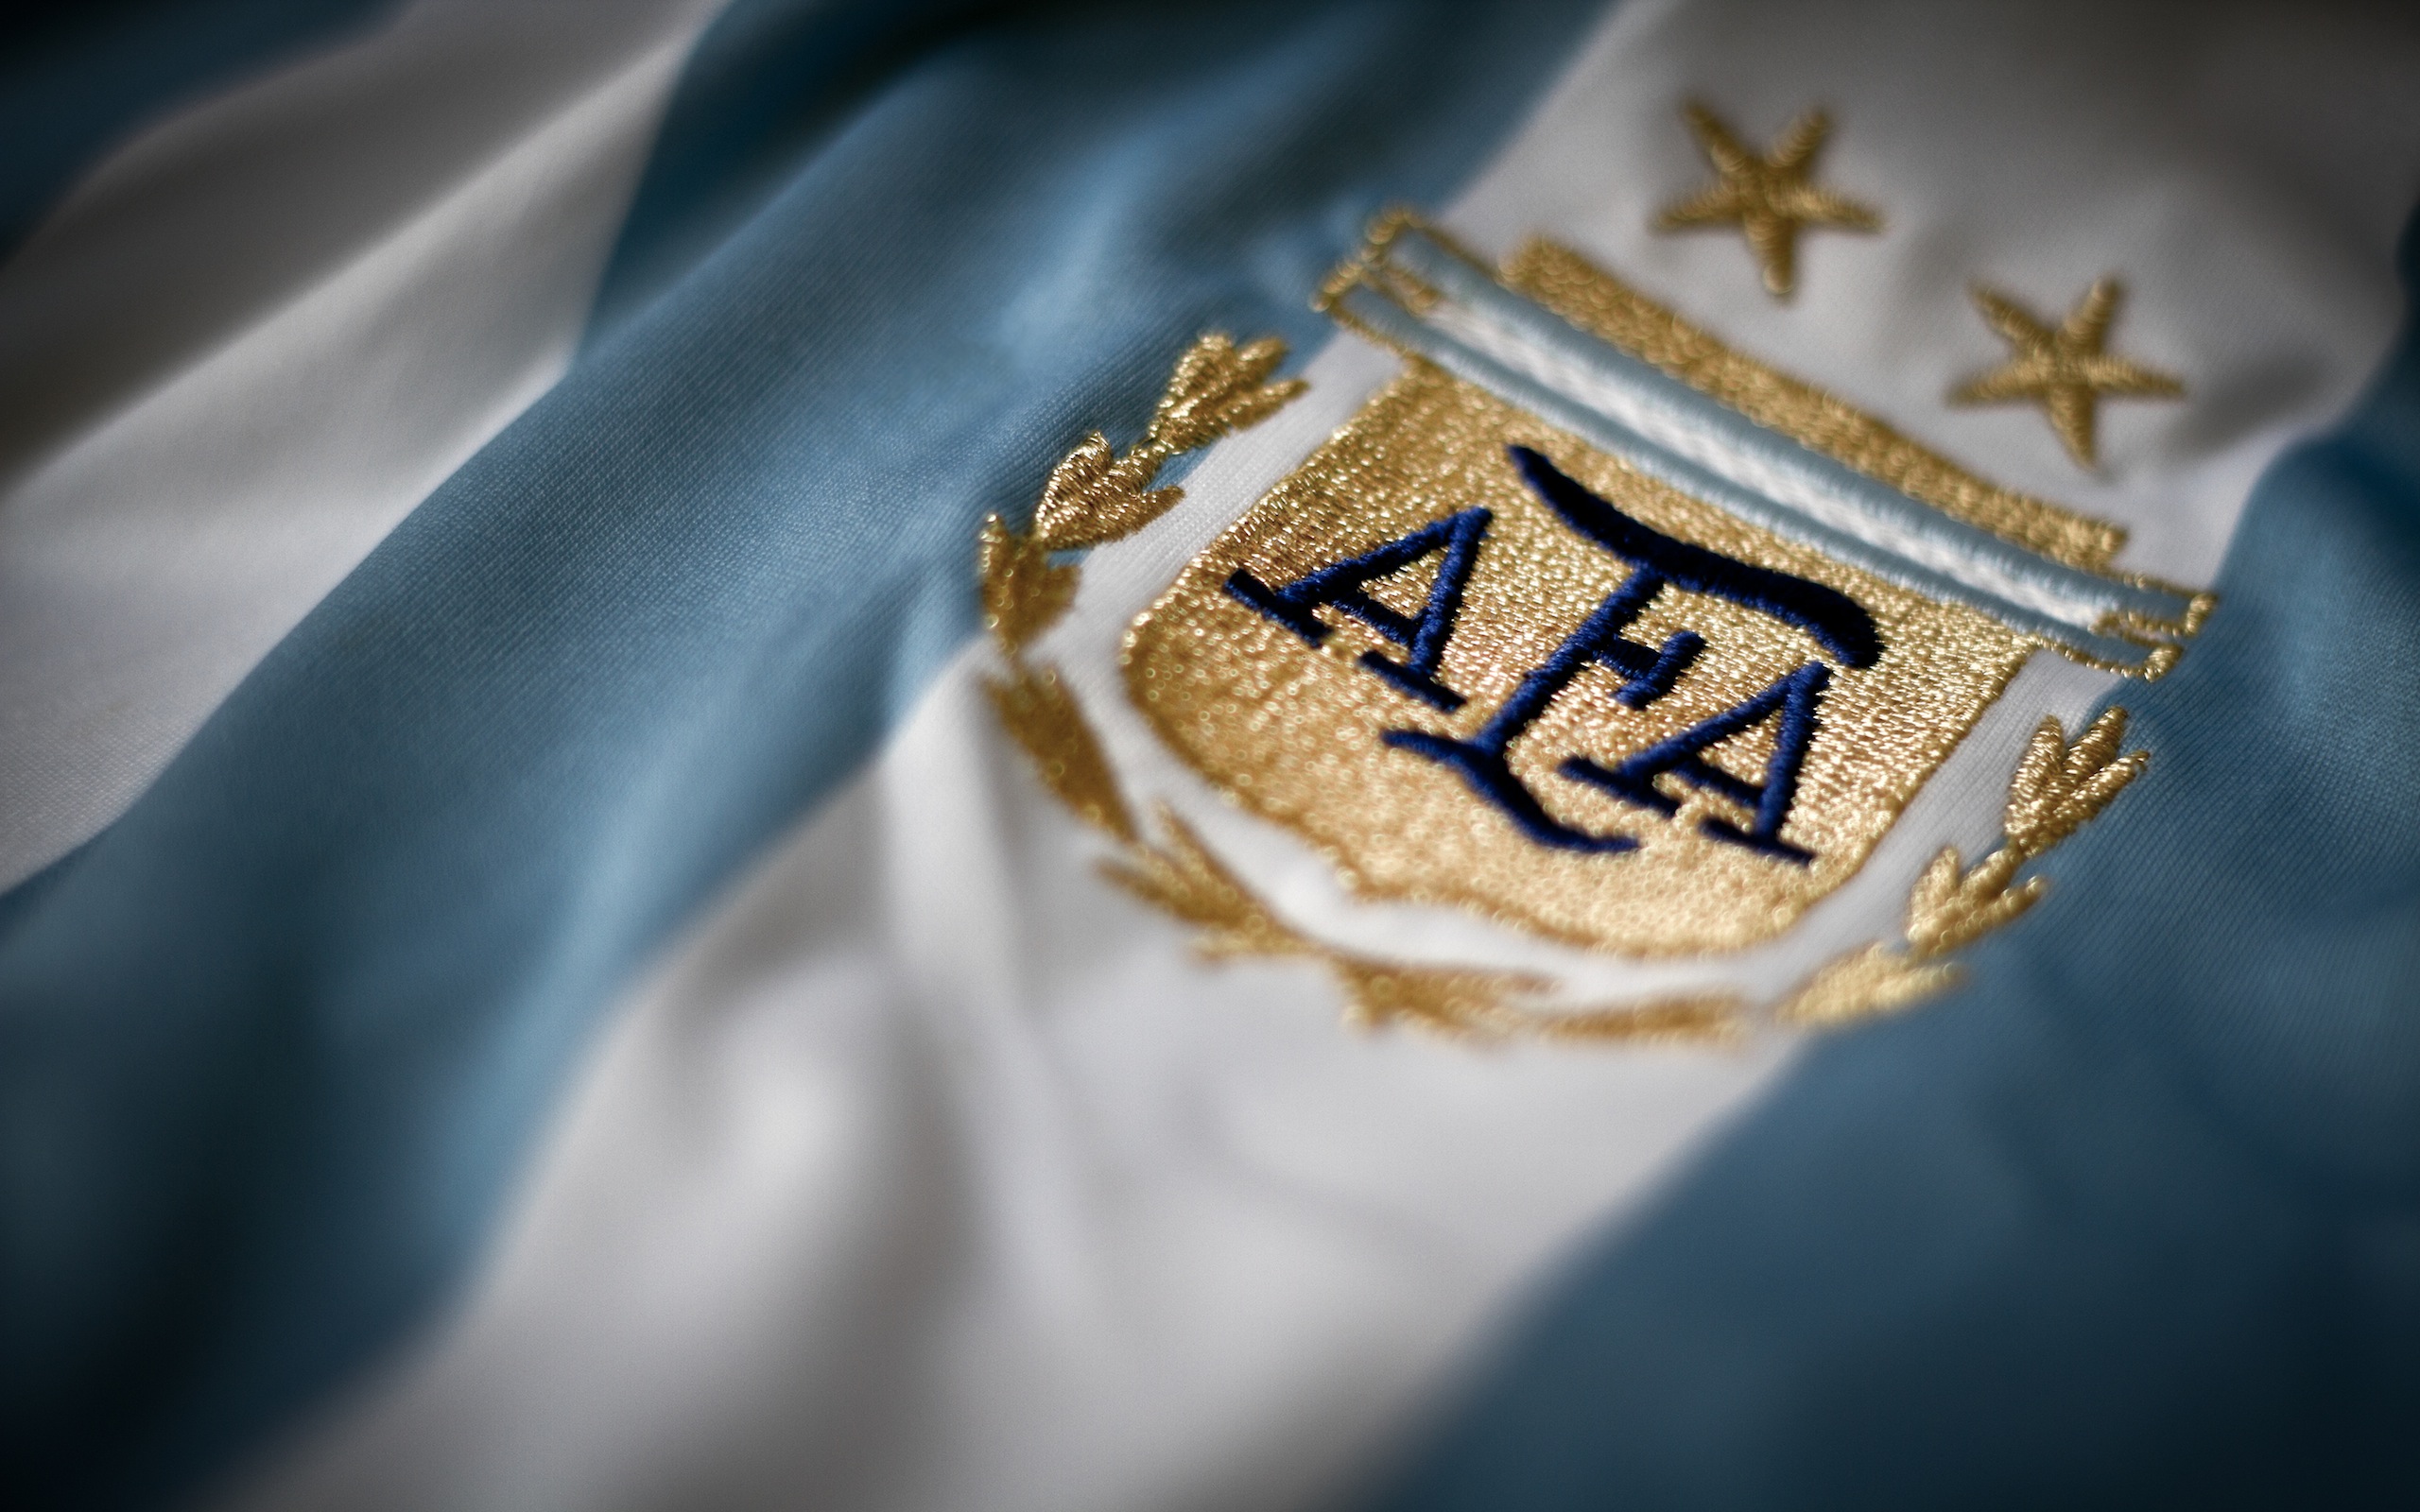 If you like Argentina, surely you'll love this wallpaper we have choosen for you! Let us know if you like it.